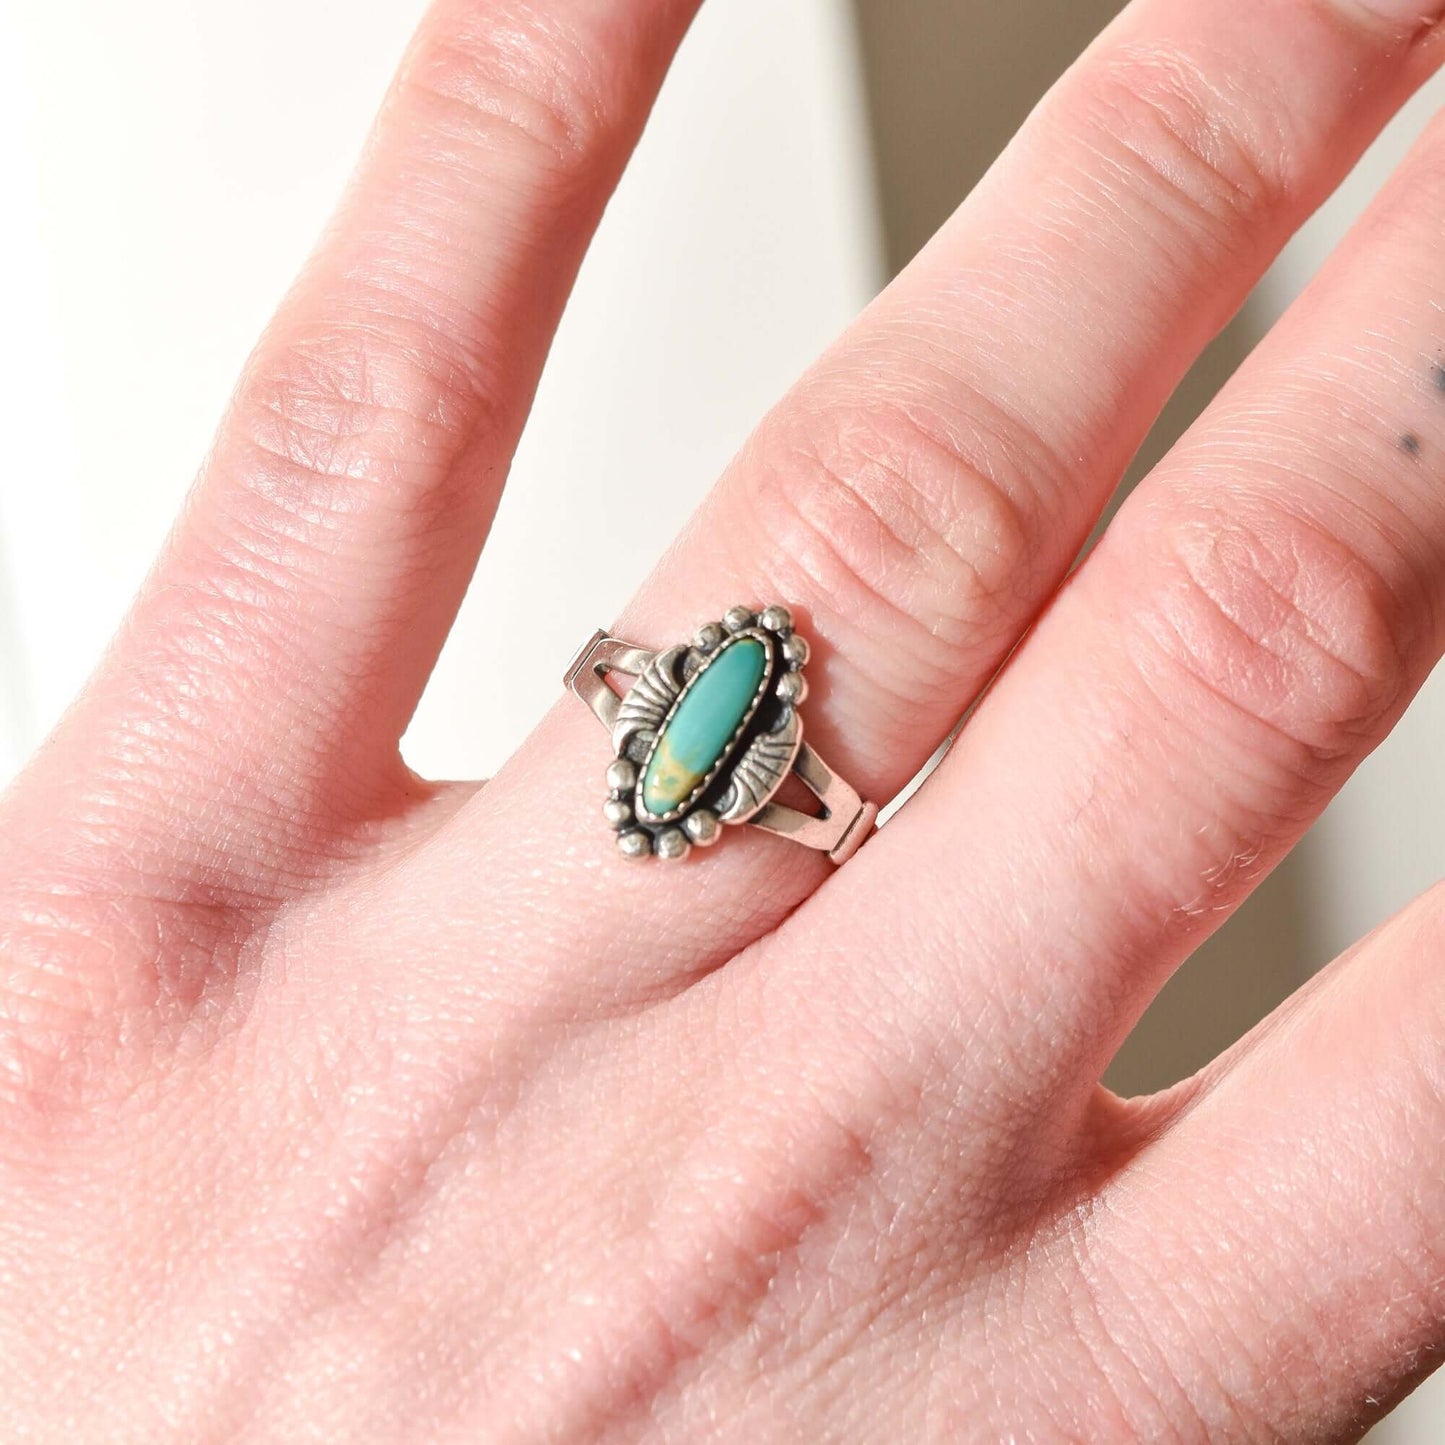 Cute Minimalist Sterling Silver Turquoise Ring, Southwestern Jewelry, Native American, Size 7 US